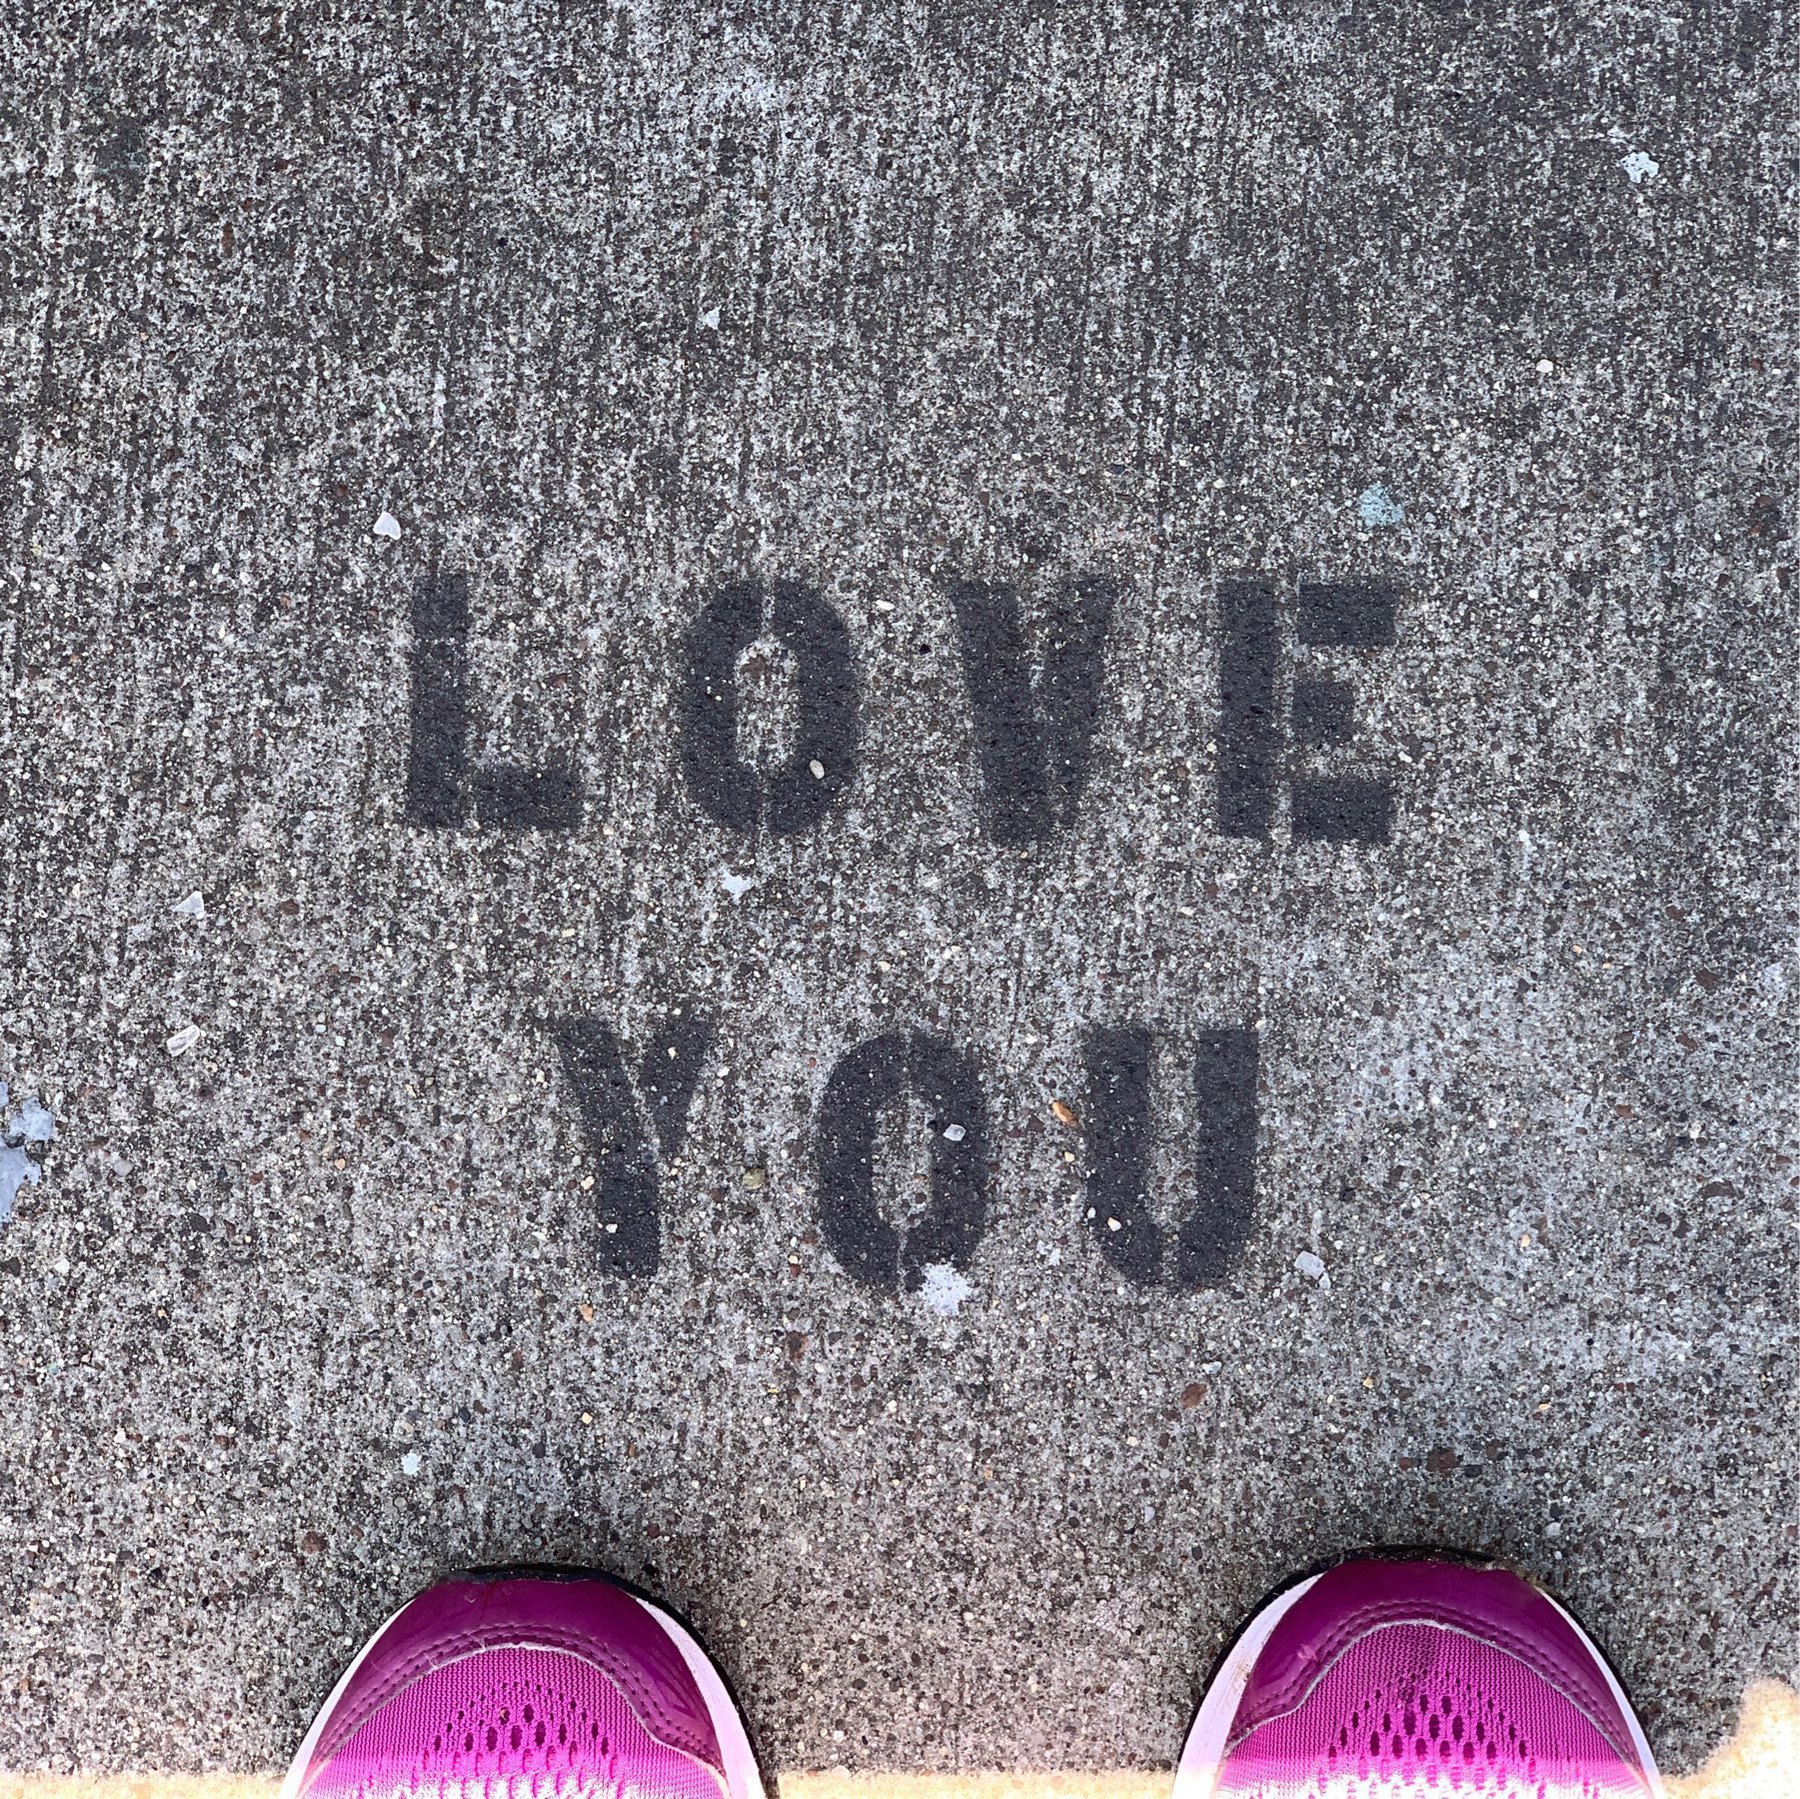 stenciled LOVE YOU on the sidewalk